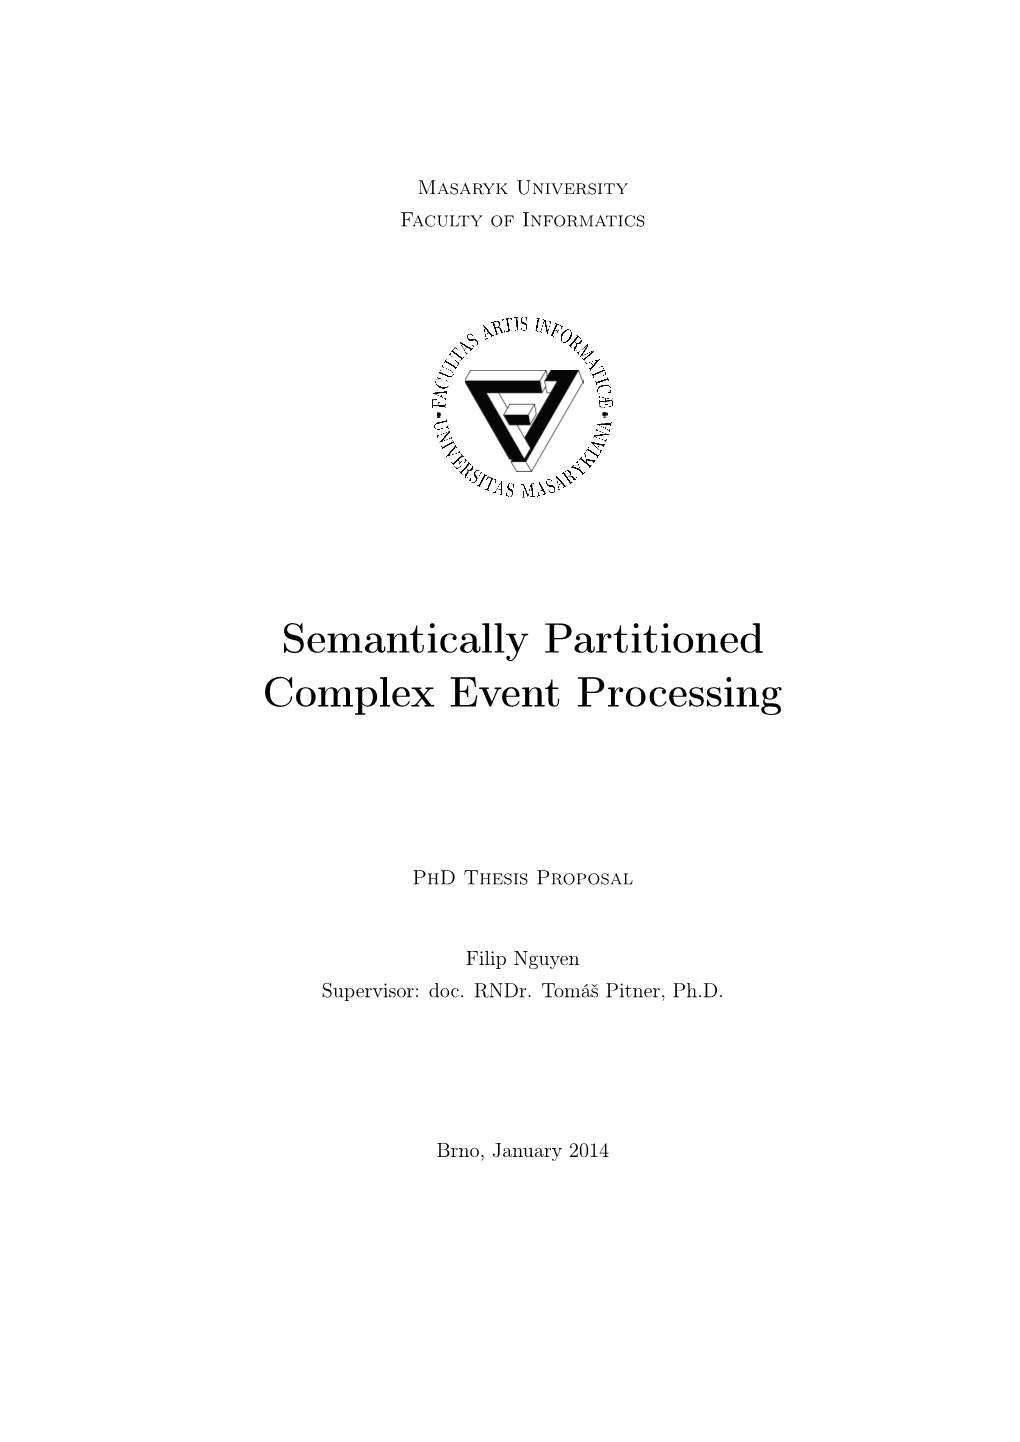 Semantically Partitioned Complex Event Processing